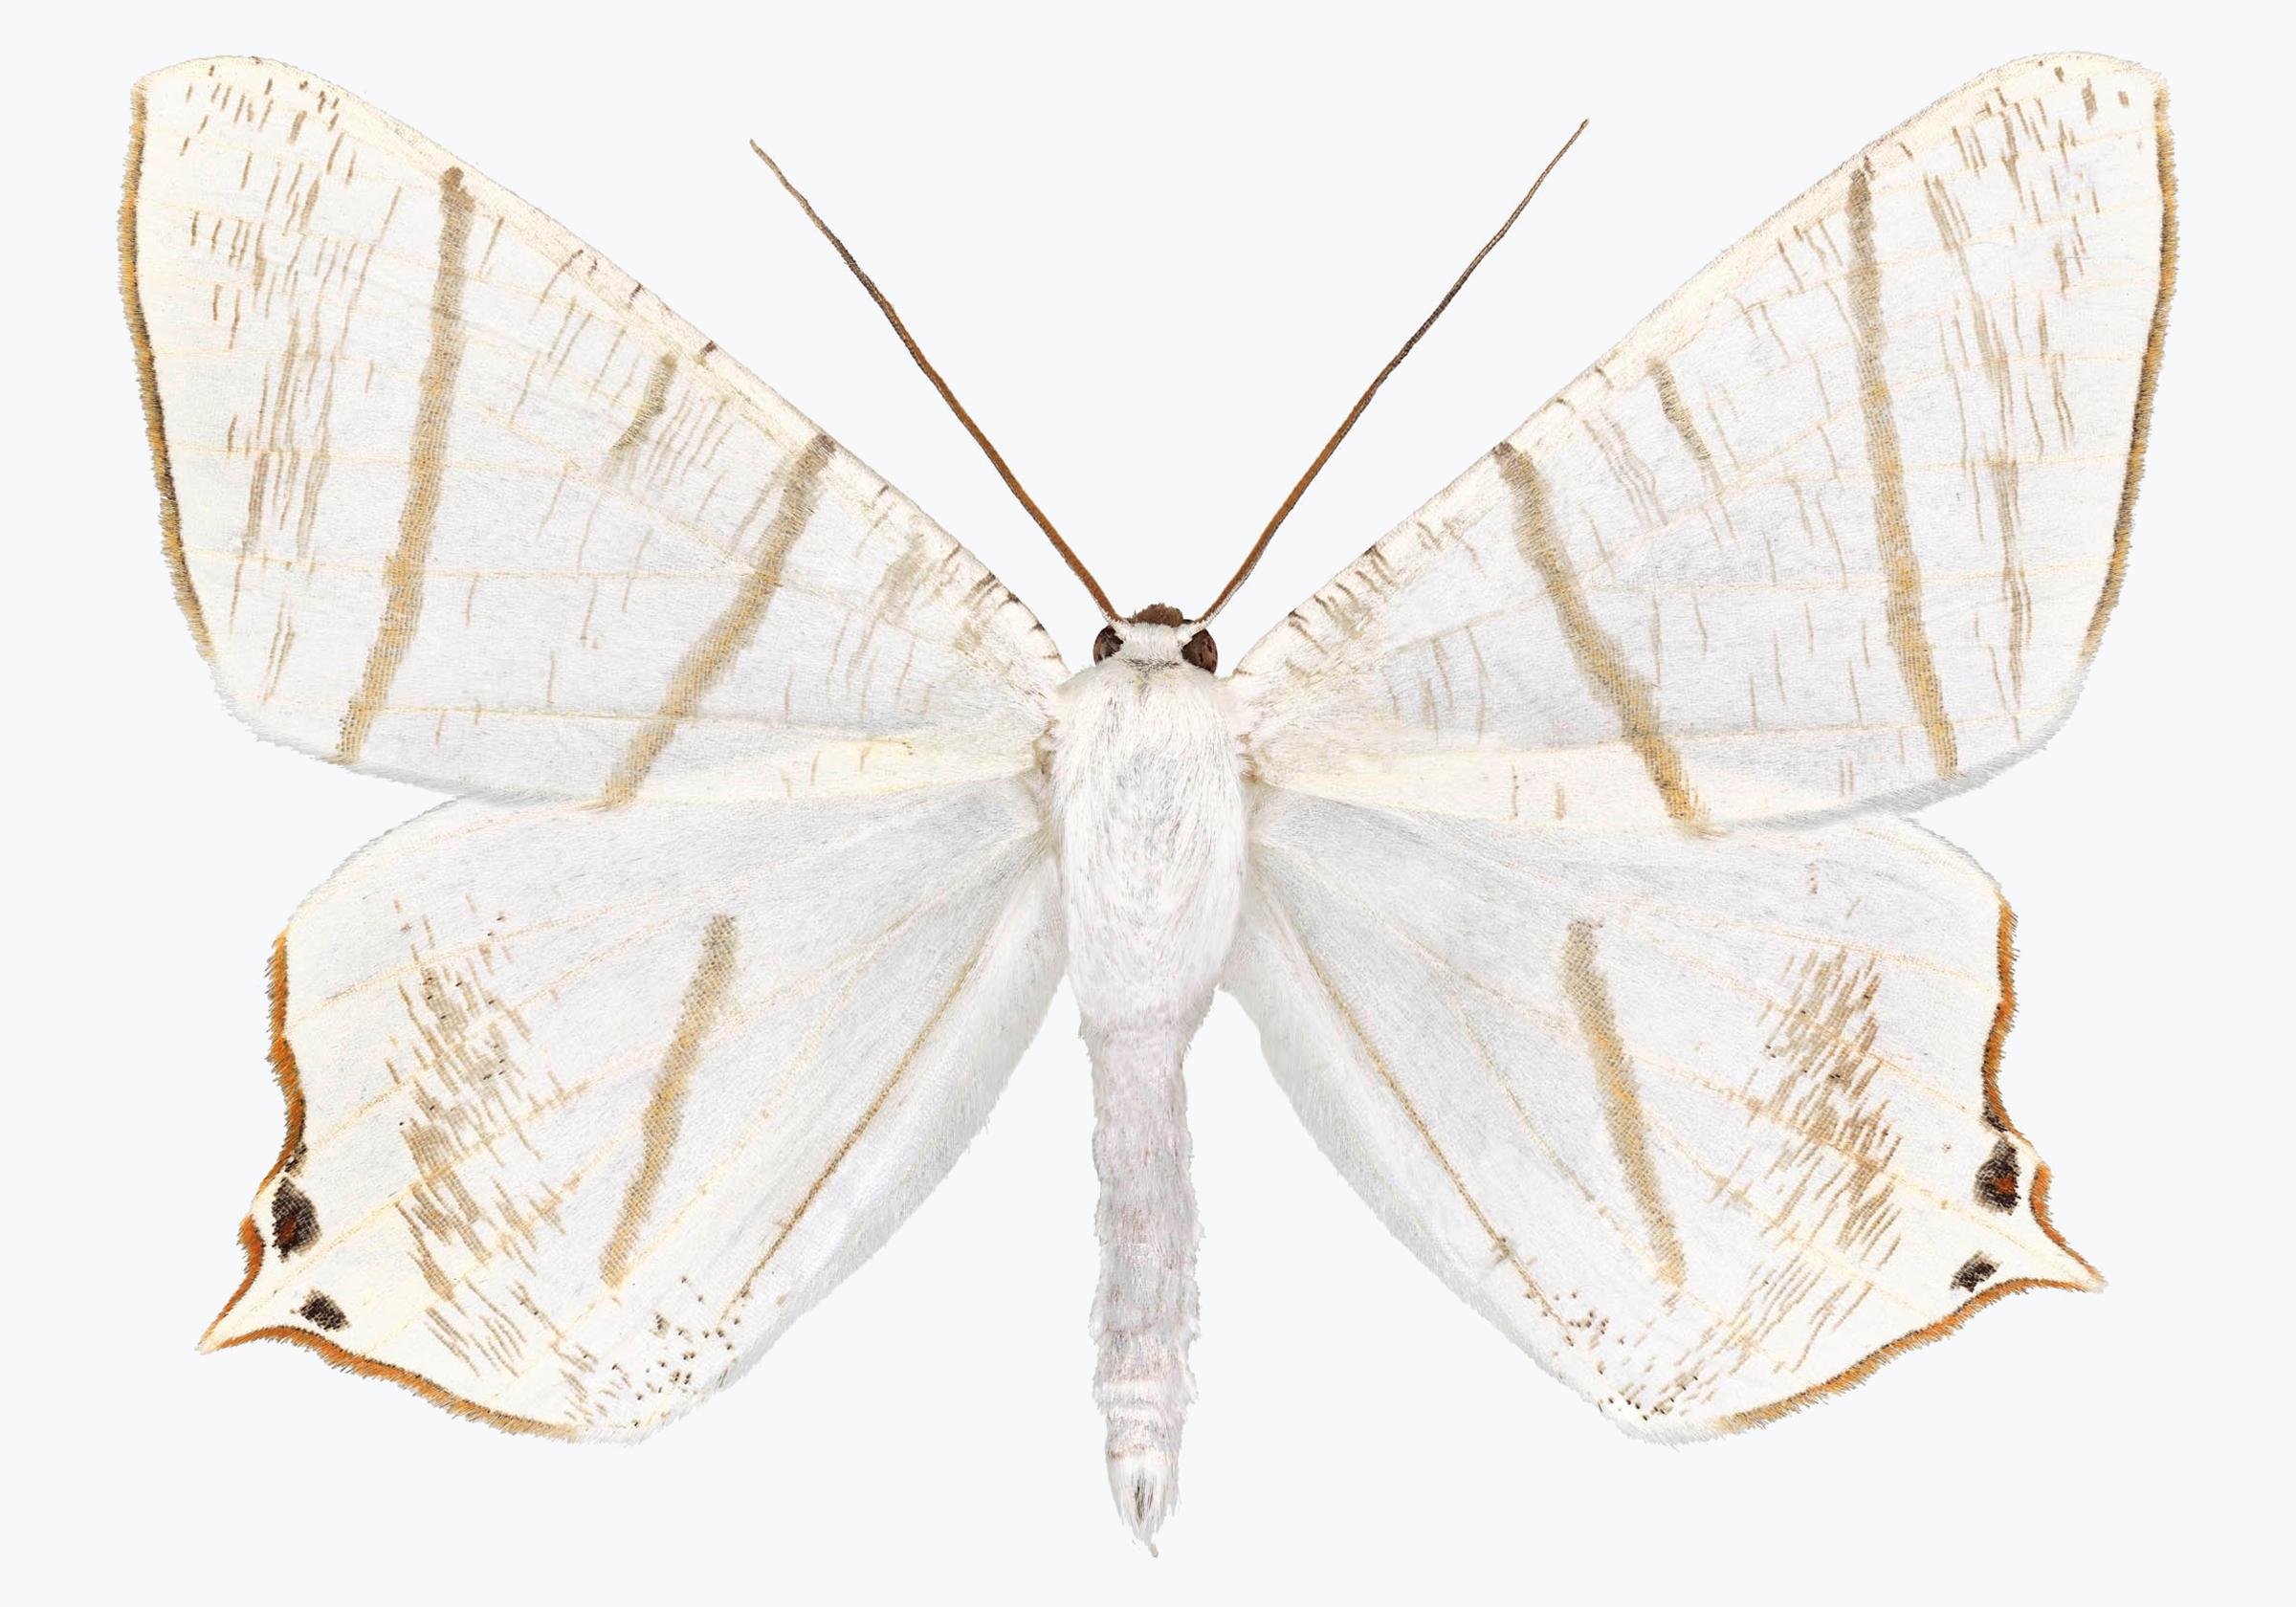 Color Photograph Joseph Scheer - Ourapteryx Species, White, Brown, Beige Moth, White Winged Insect Photograph